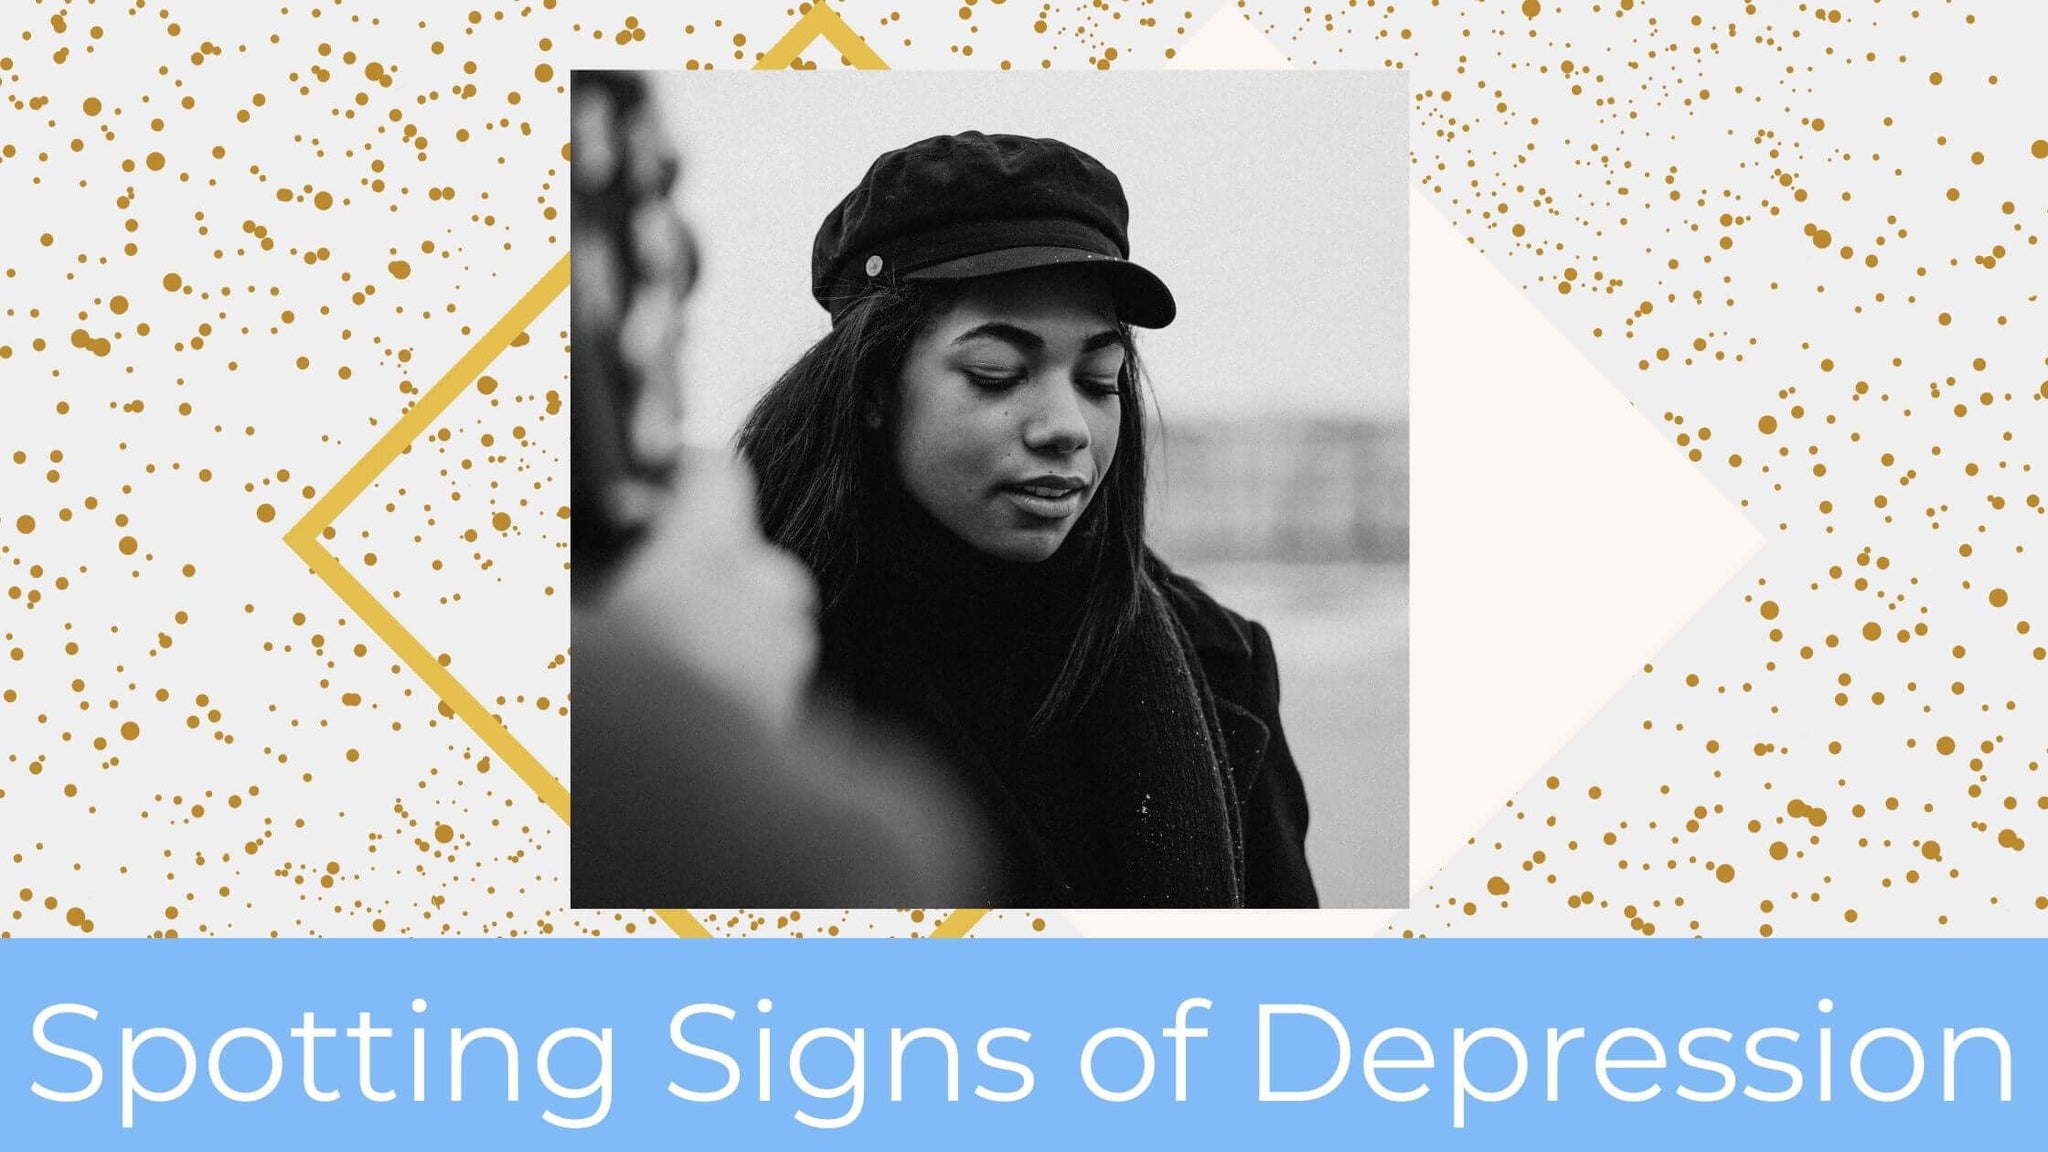 A black and white photo of young lady, captioned "Spotting the signs of Depression."